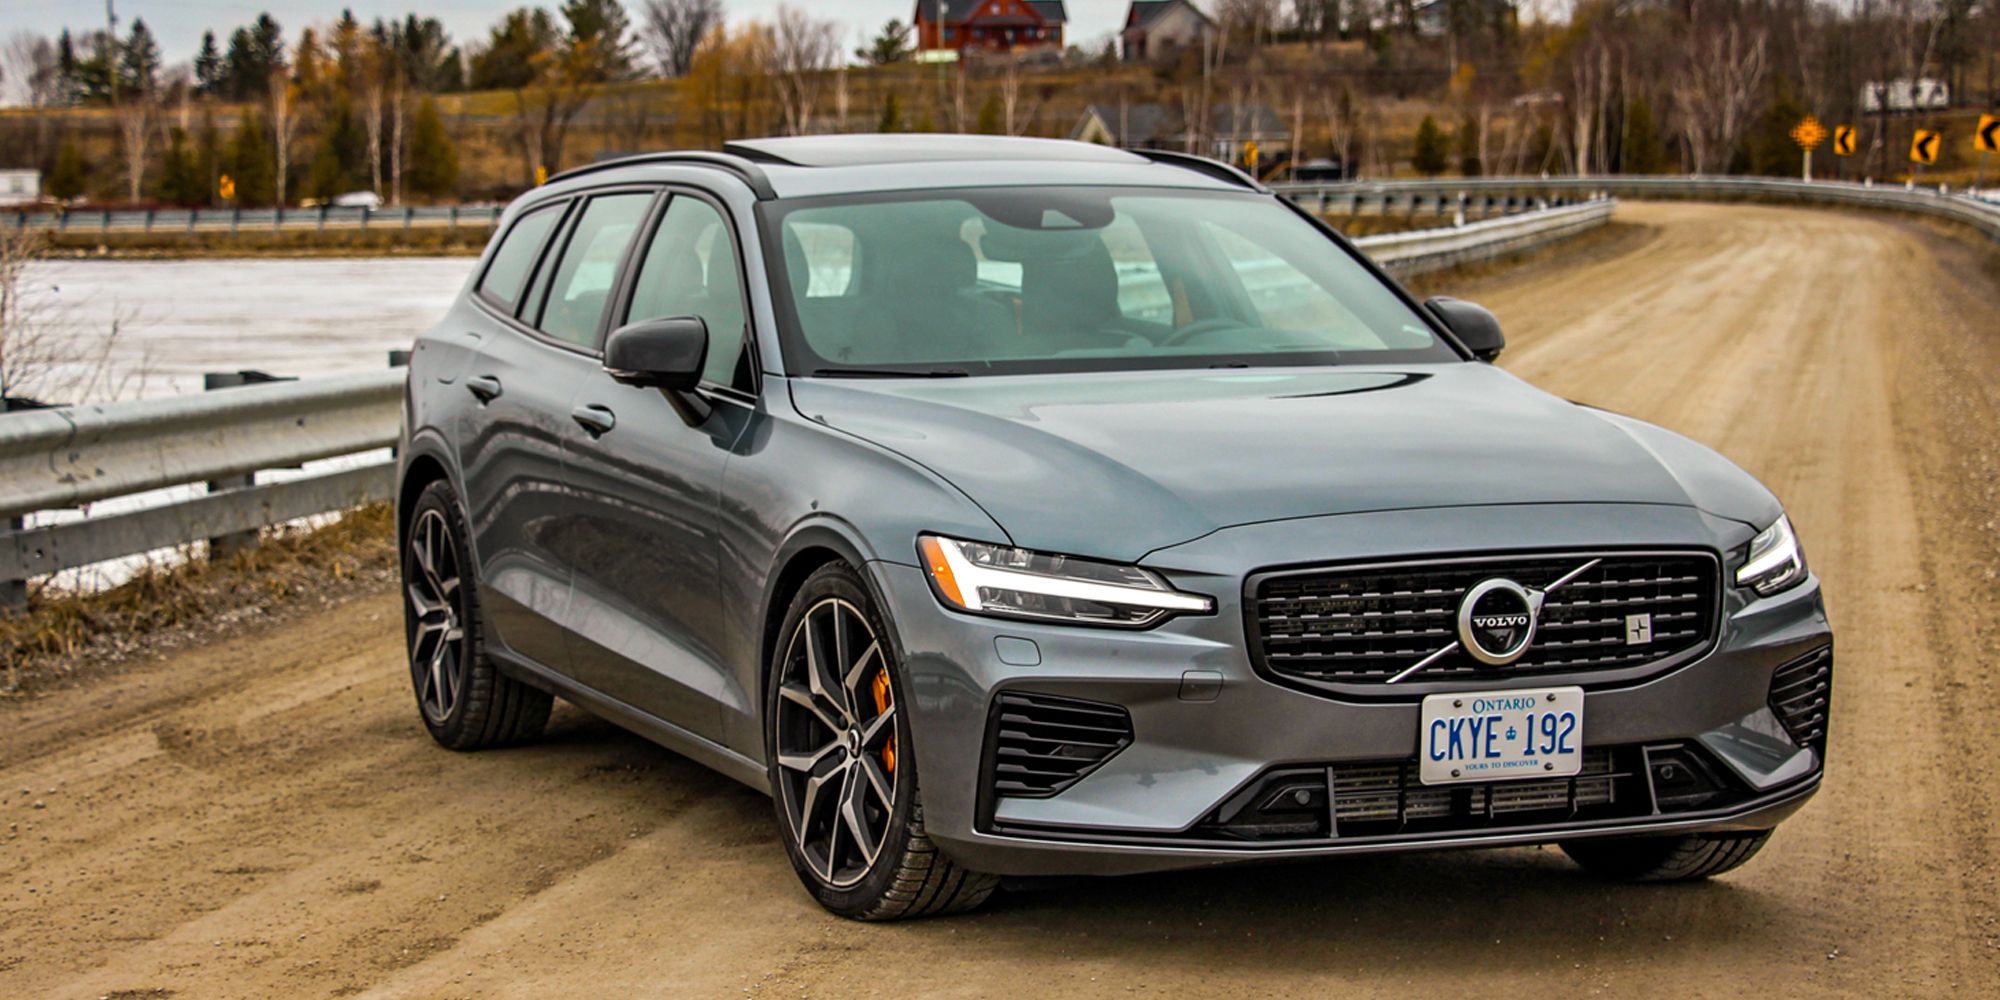 The front of the V60 PE